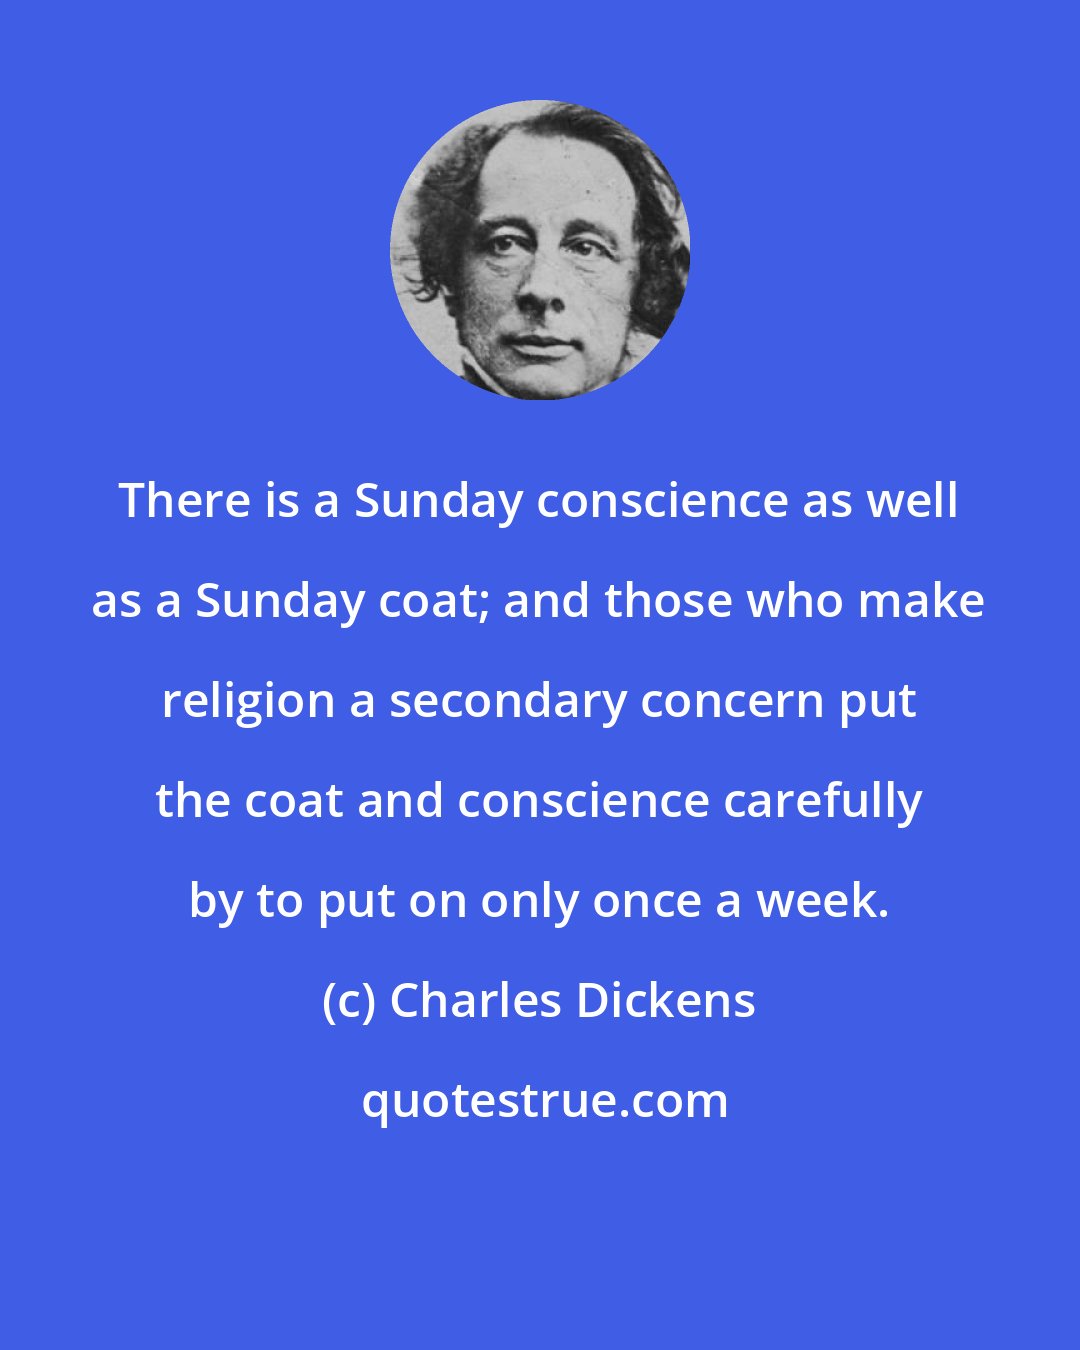 Charles Dickens: There is a Sunday conscience as well as a Sunday coat; and those who make religion a secondary concern put the coat and conscience carefully by to put on only once a week.